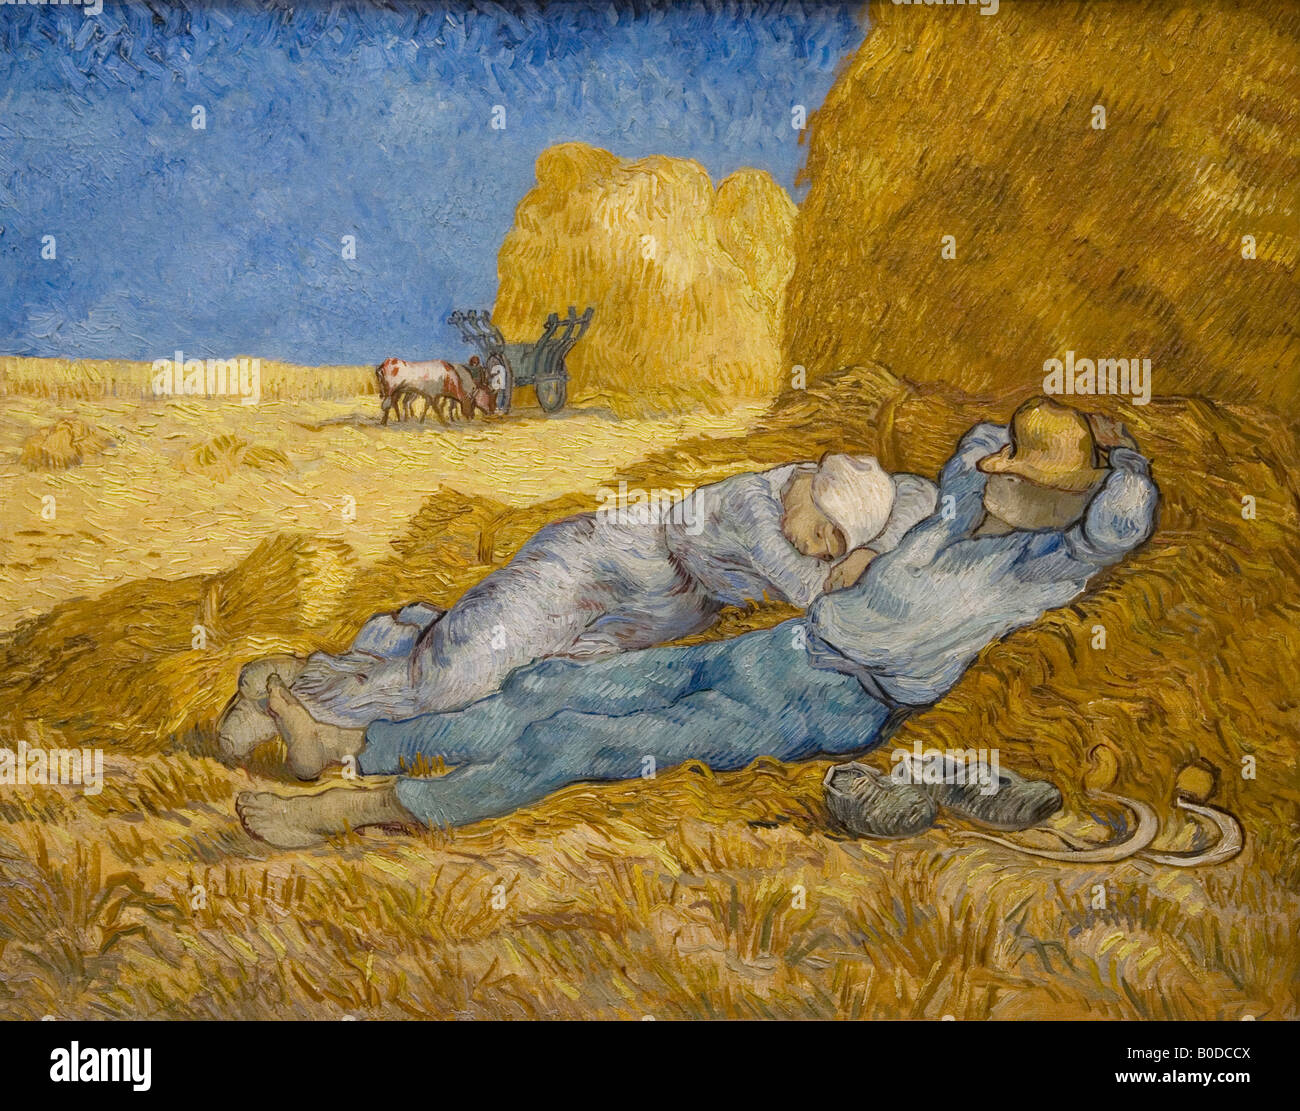 Noon Rest, La Meridienne, After Millet, Vincent van Gogh, 1889, Musee d'Orsay Museum and Art Gallery, Paris, France, Europe Stock Photo